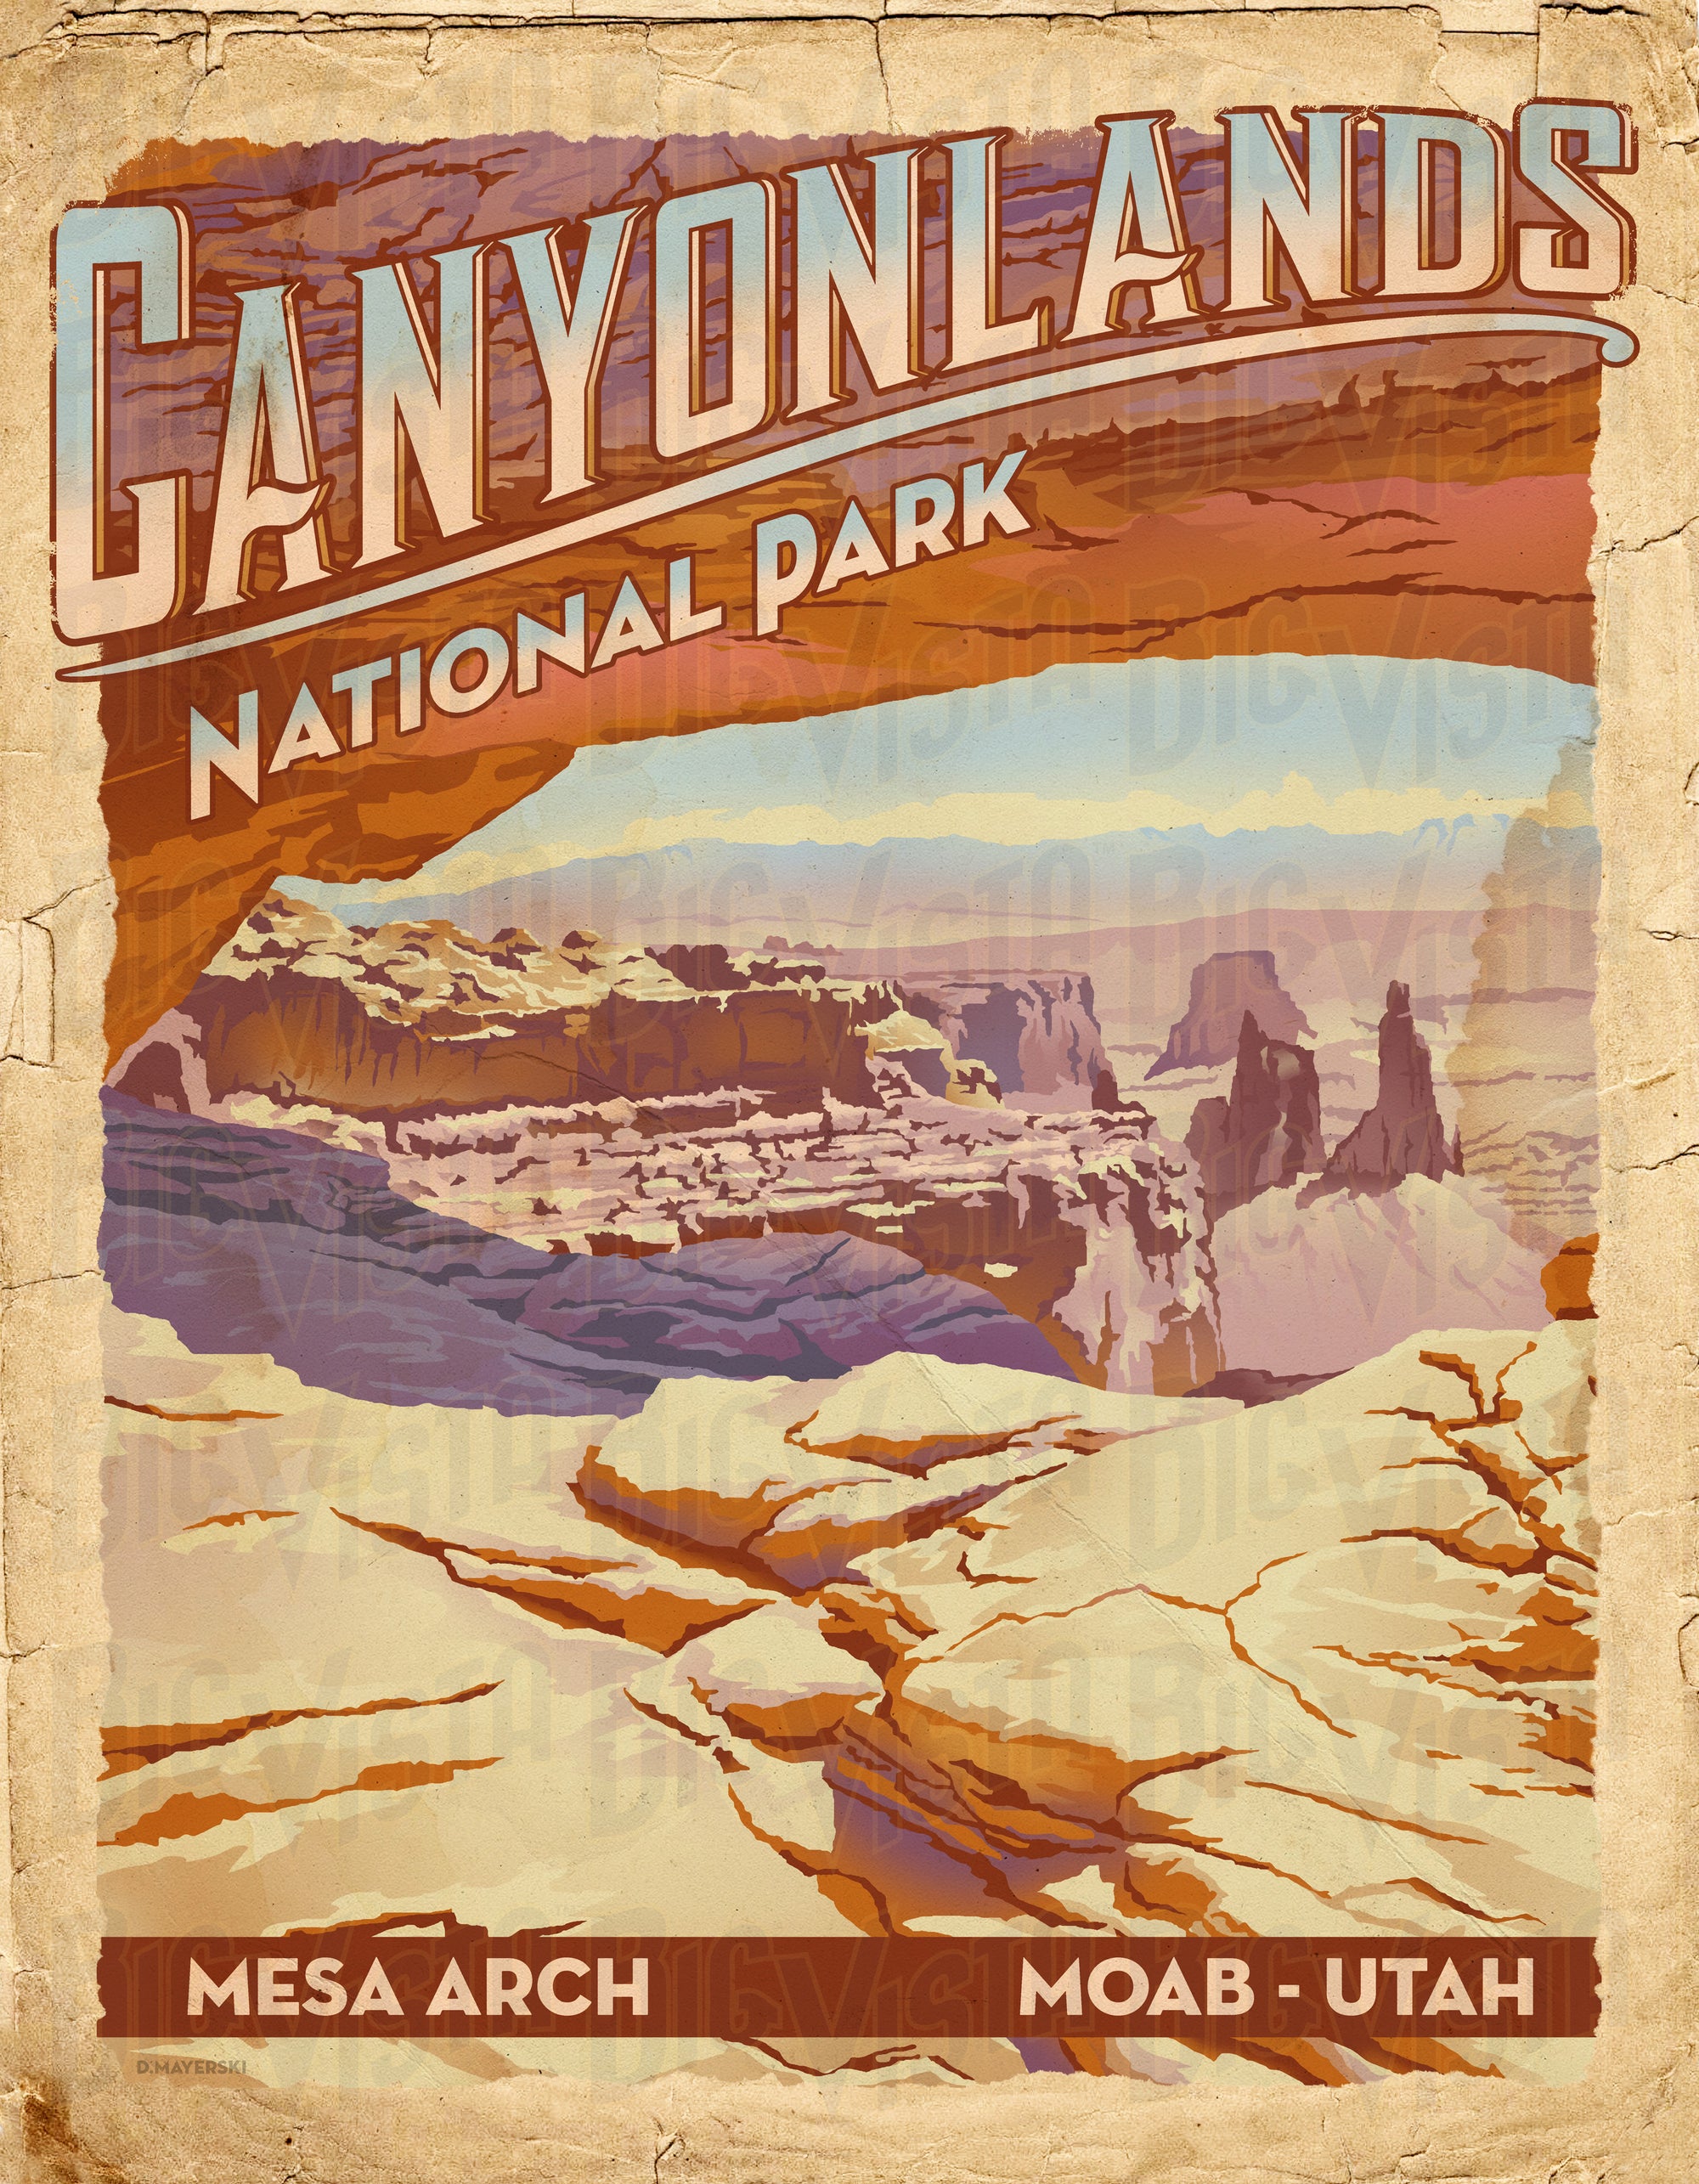 Canyonlands poster